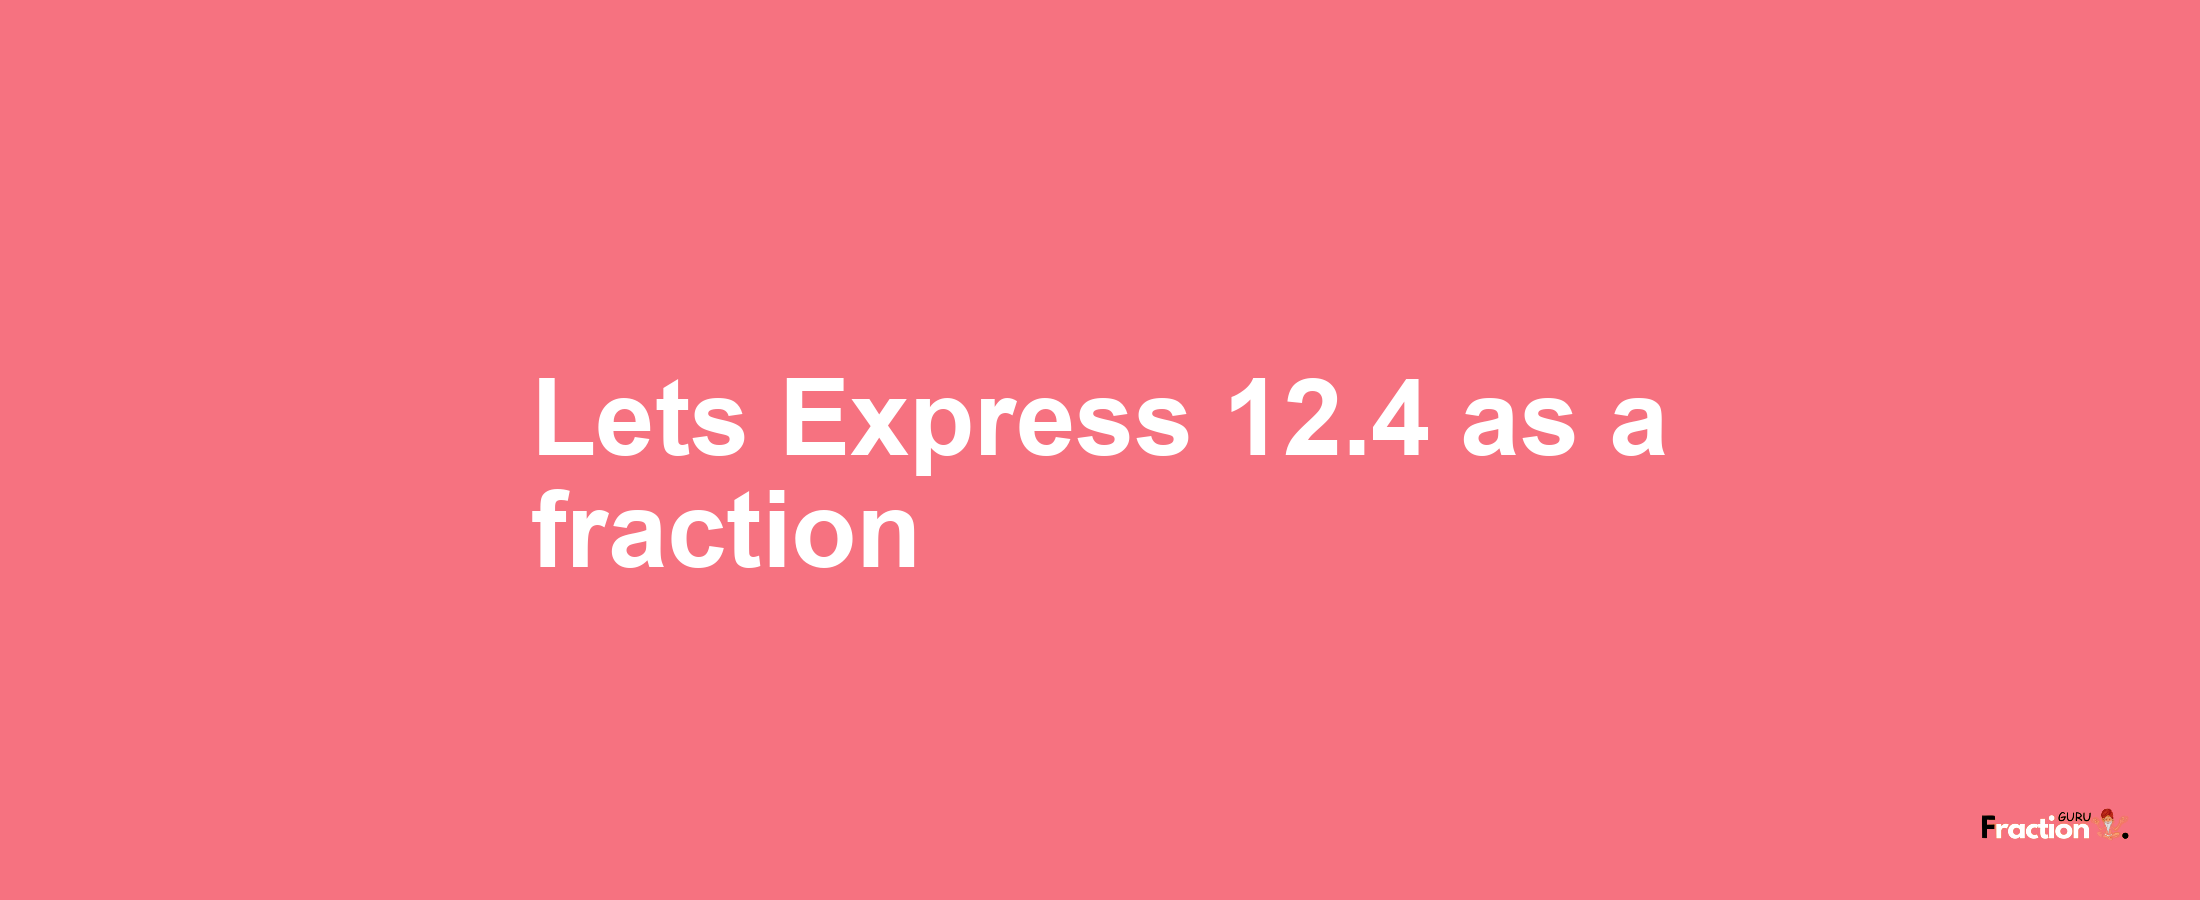 Lets Express 12.4 as afraction